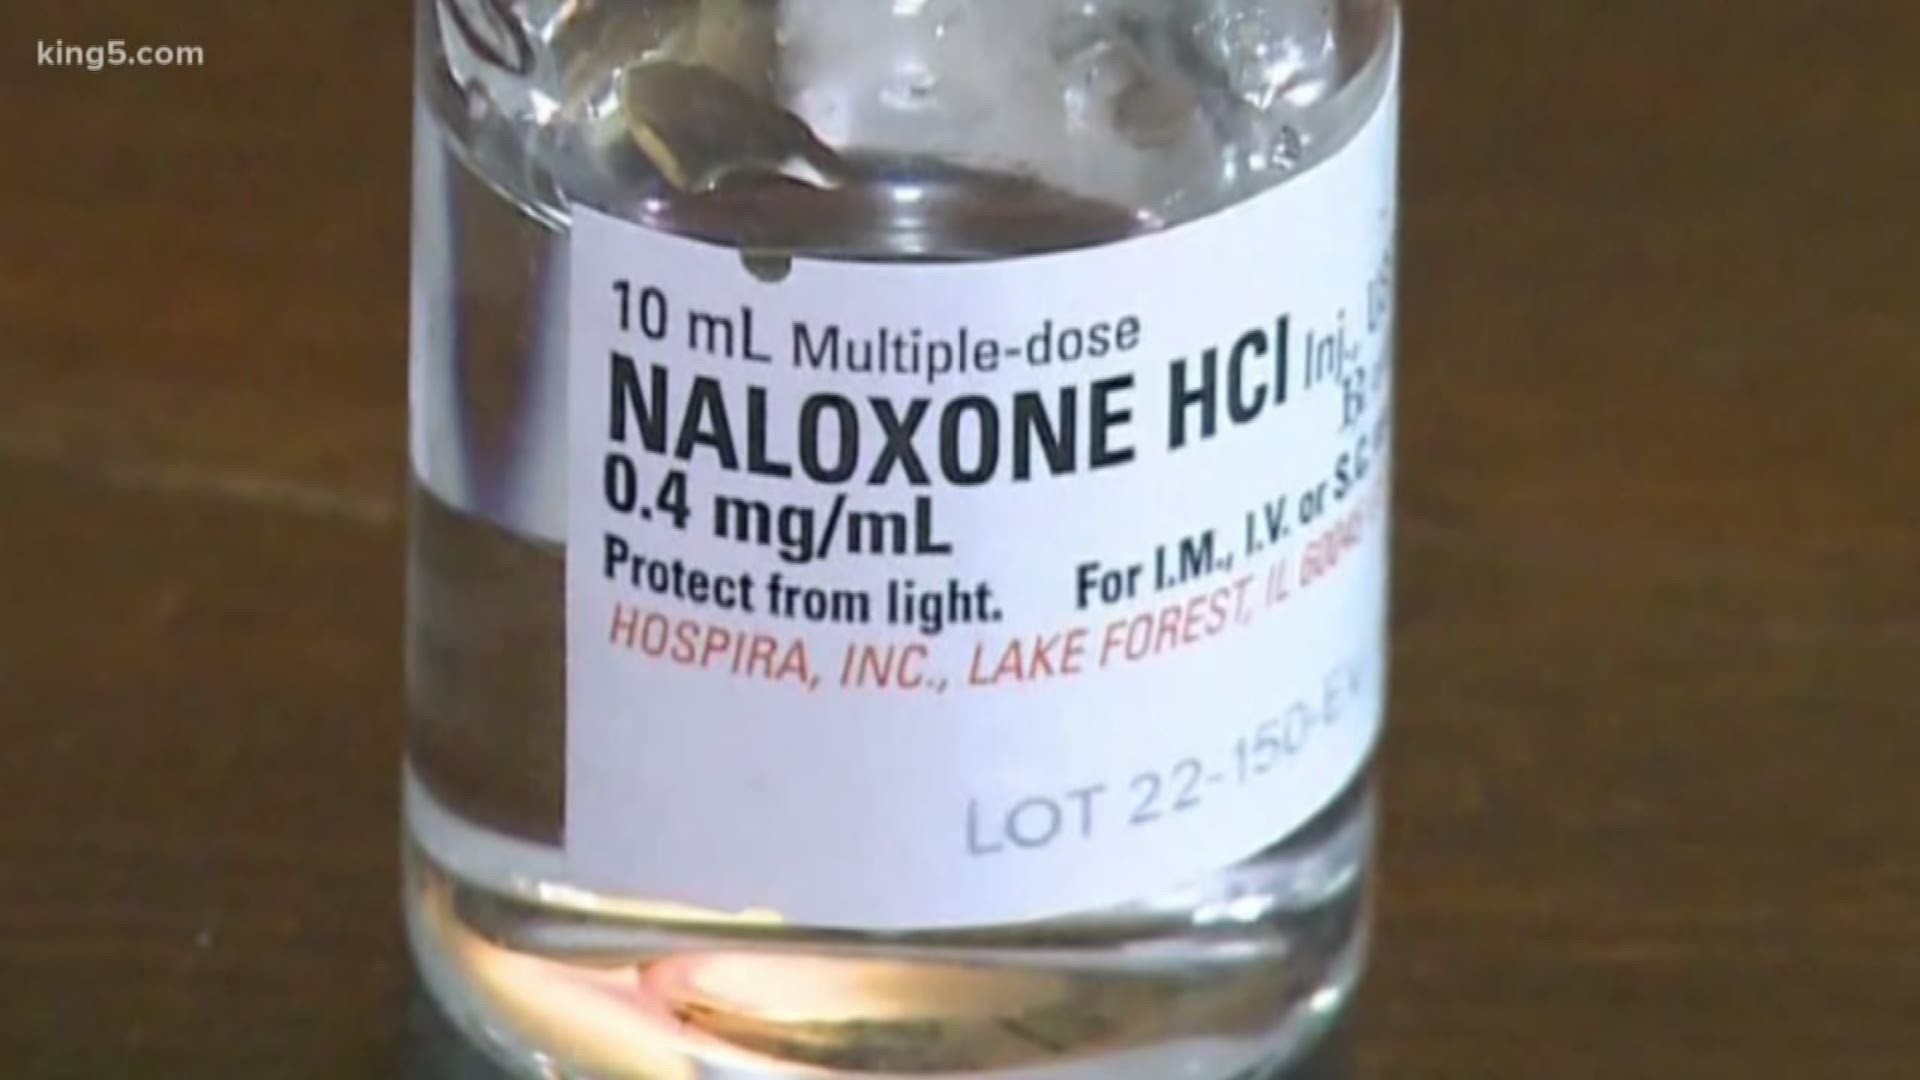 Earlier this year, Washington state made the overdose-reversal drug Naloxone available to everyone at pharmacies. KING 5's Vanessa Misciagna reports.